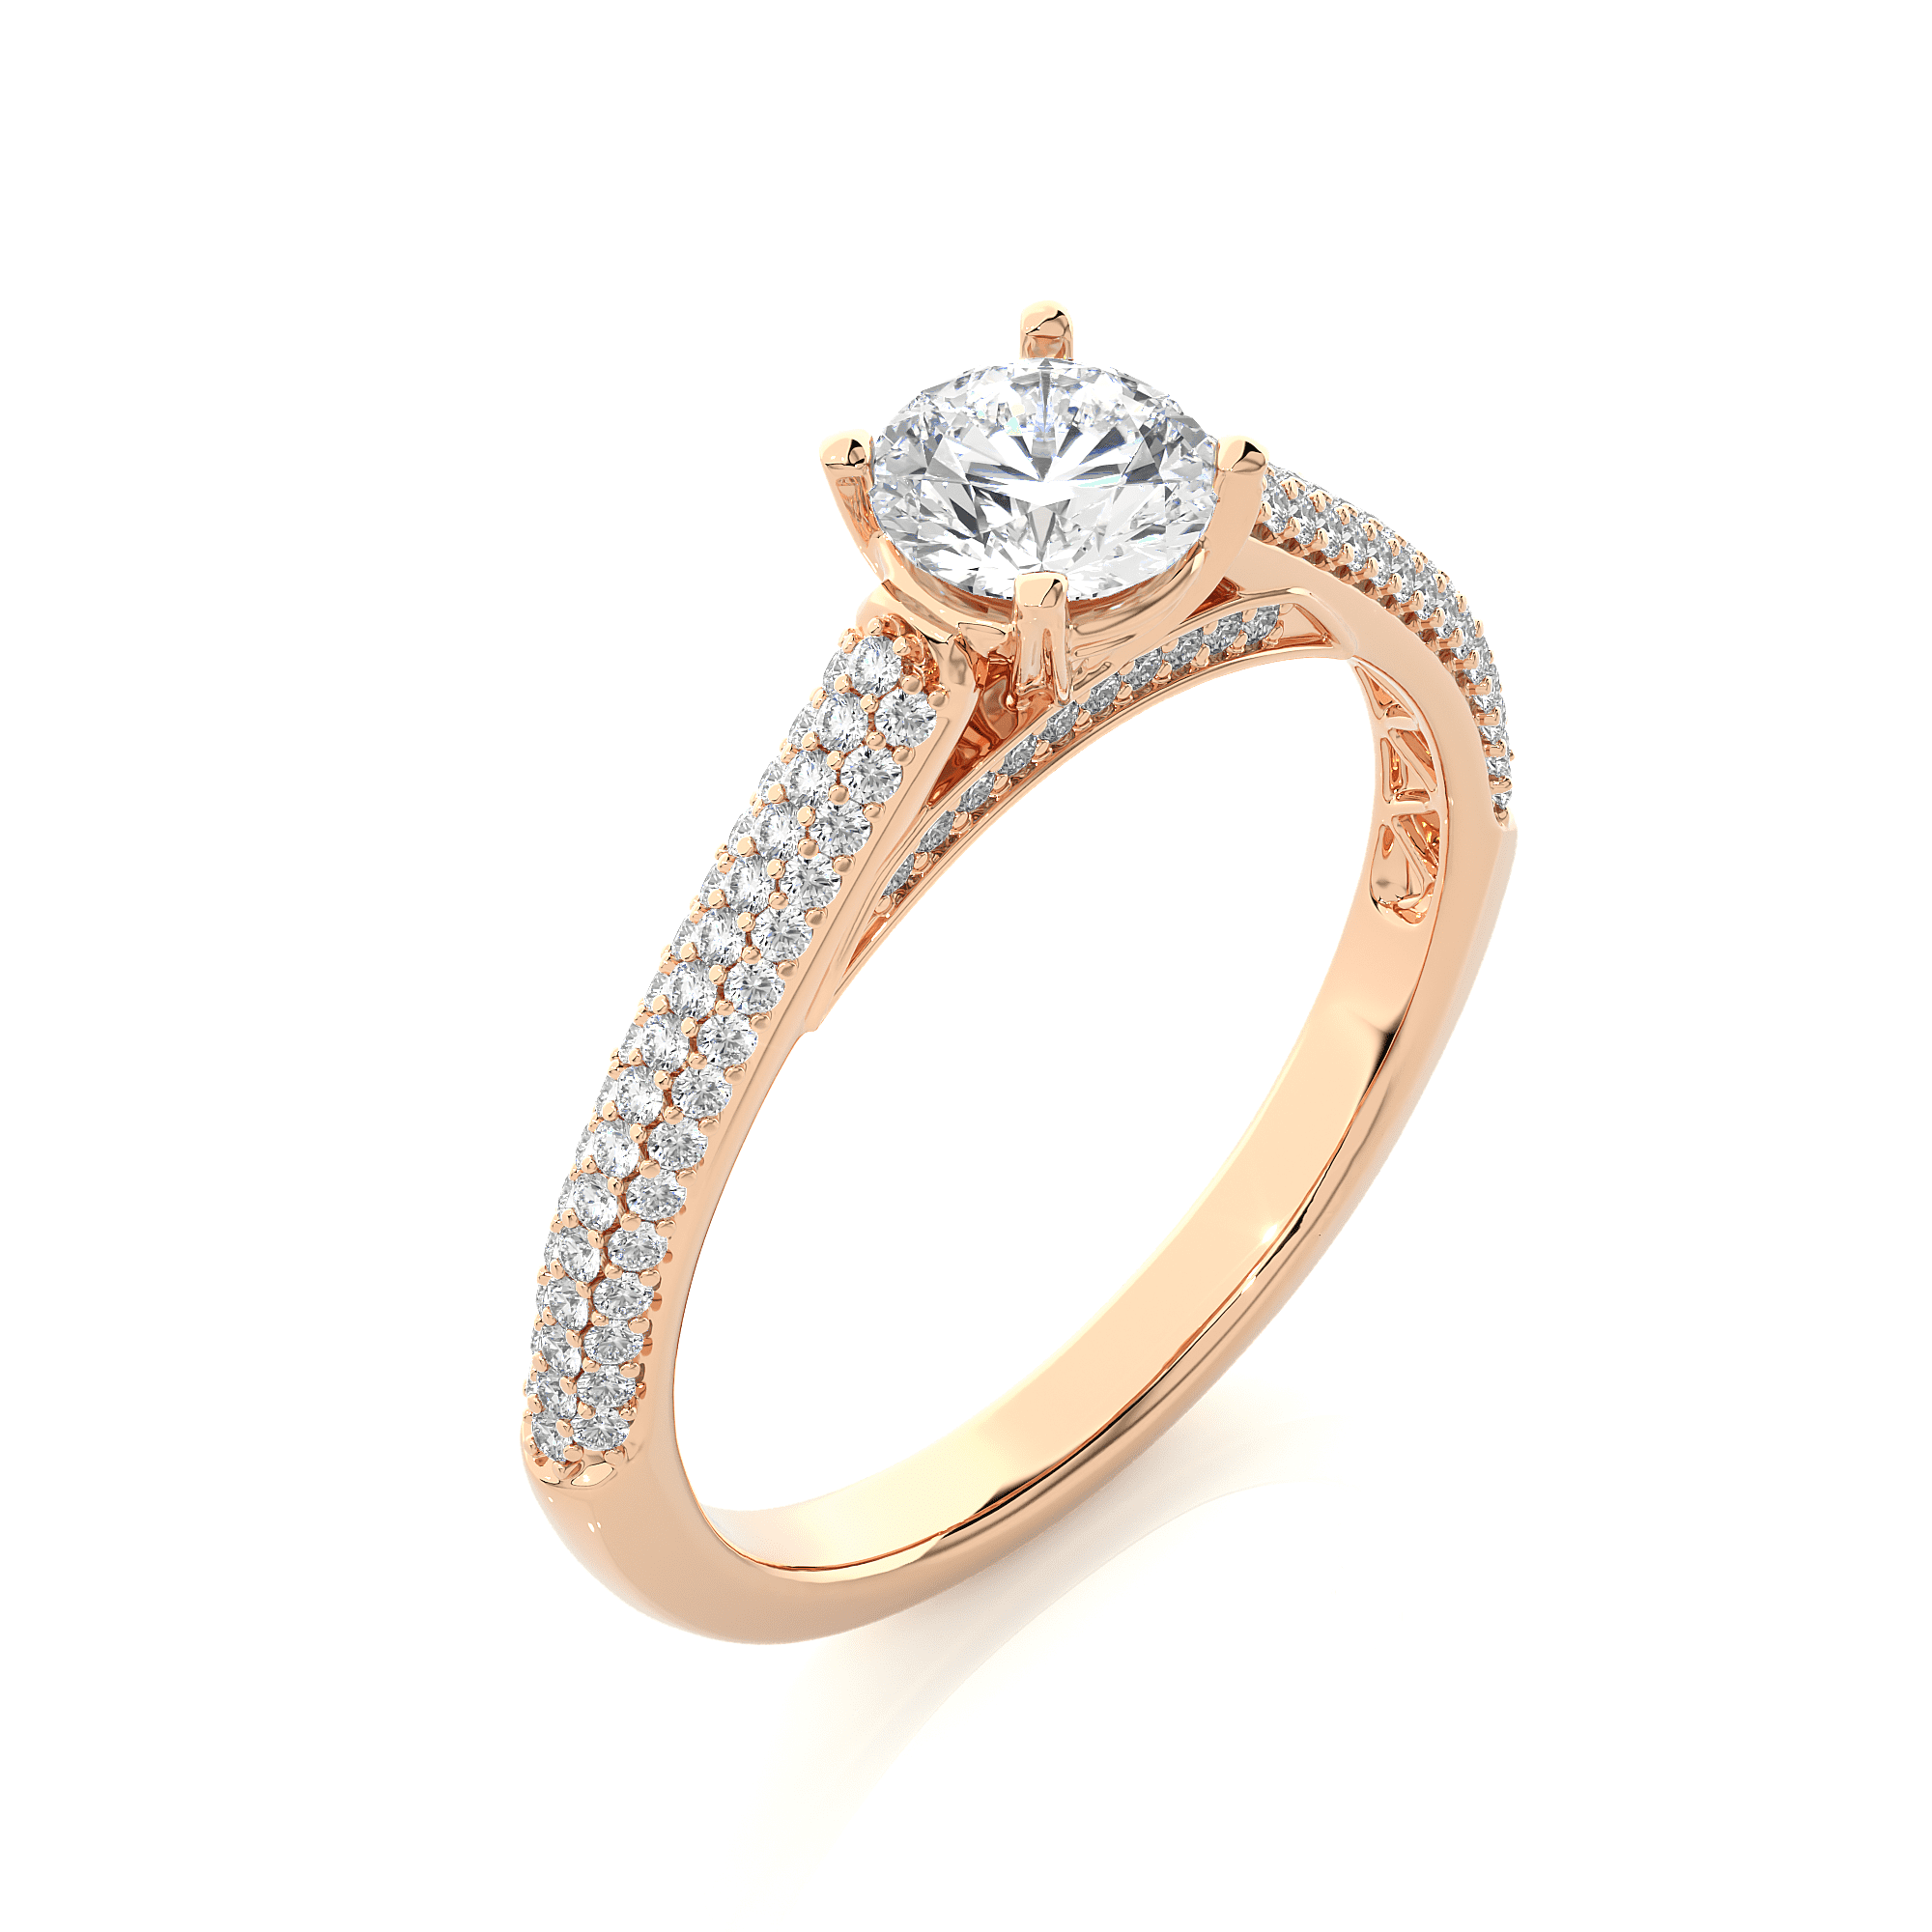 Joan Ring - Solitaire Diamond Ring